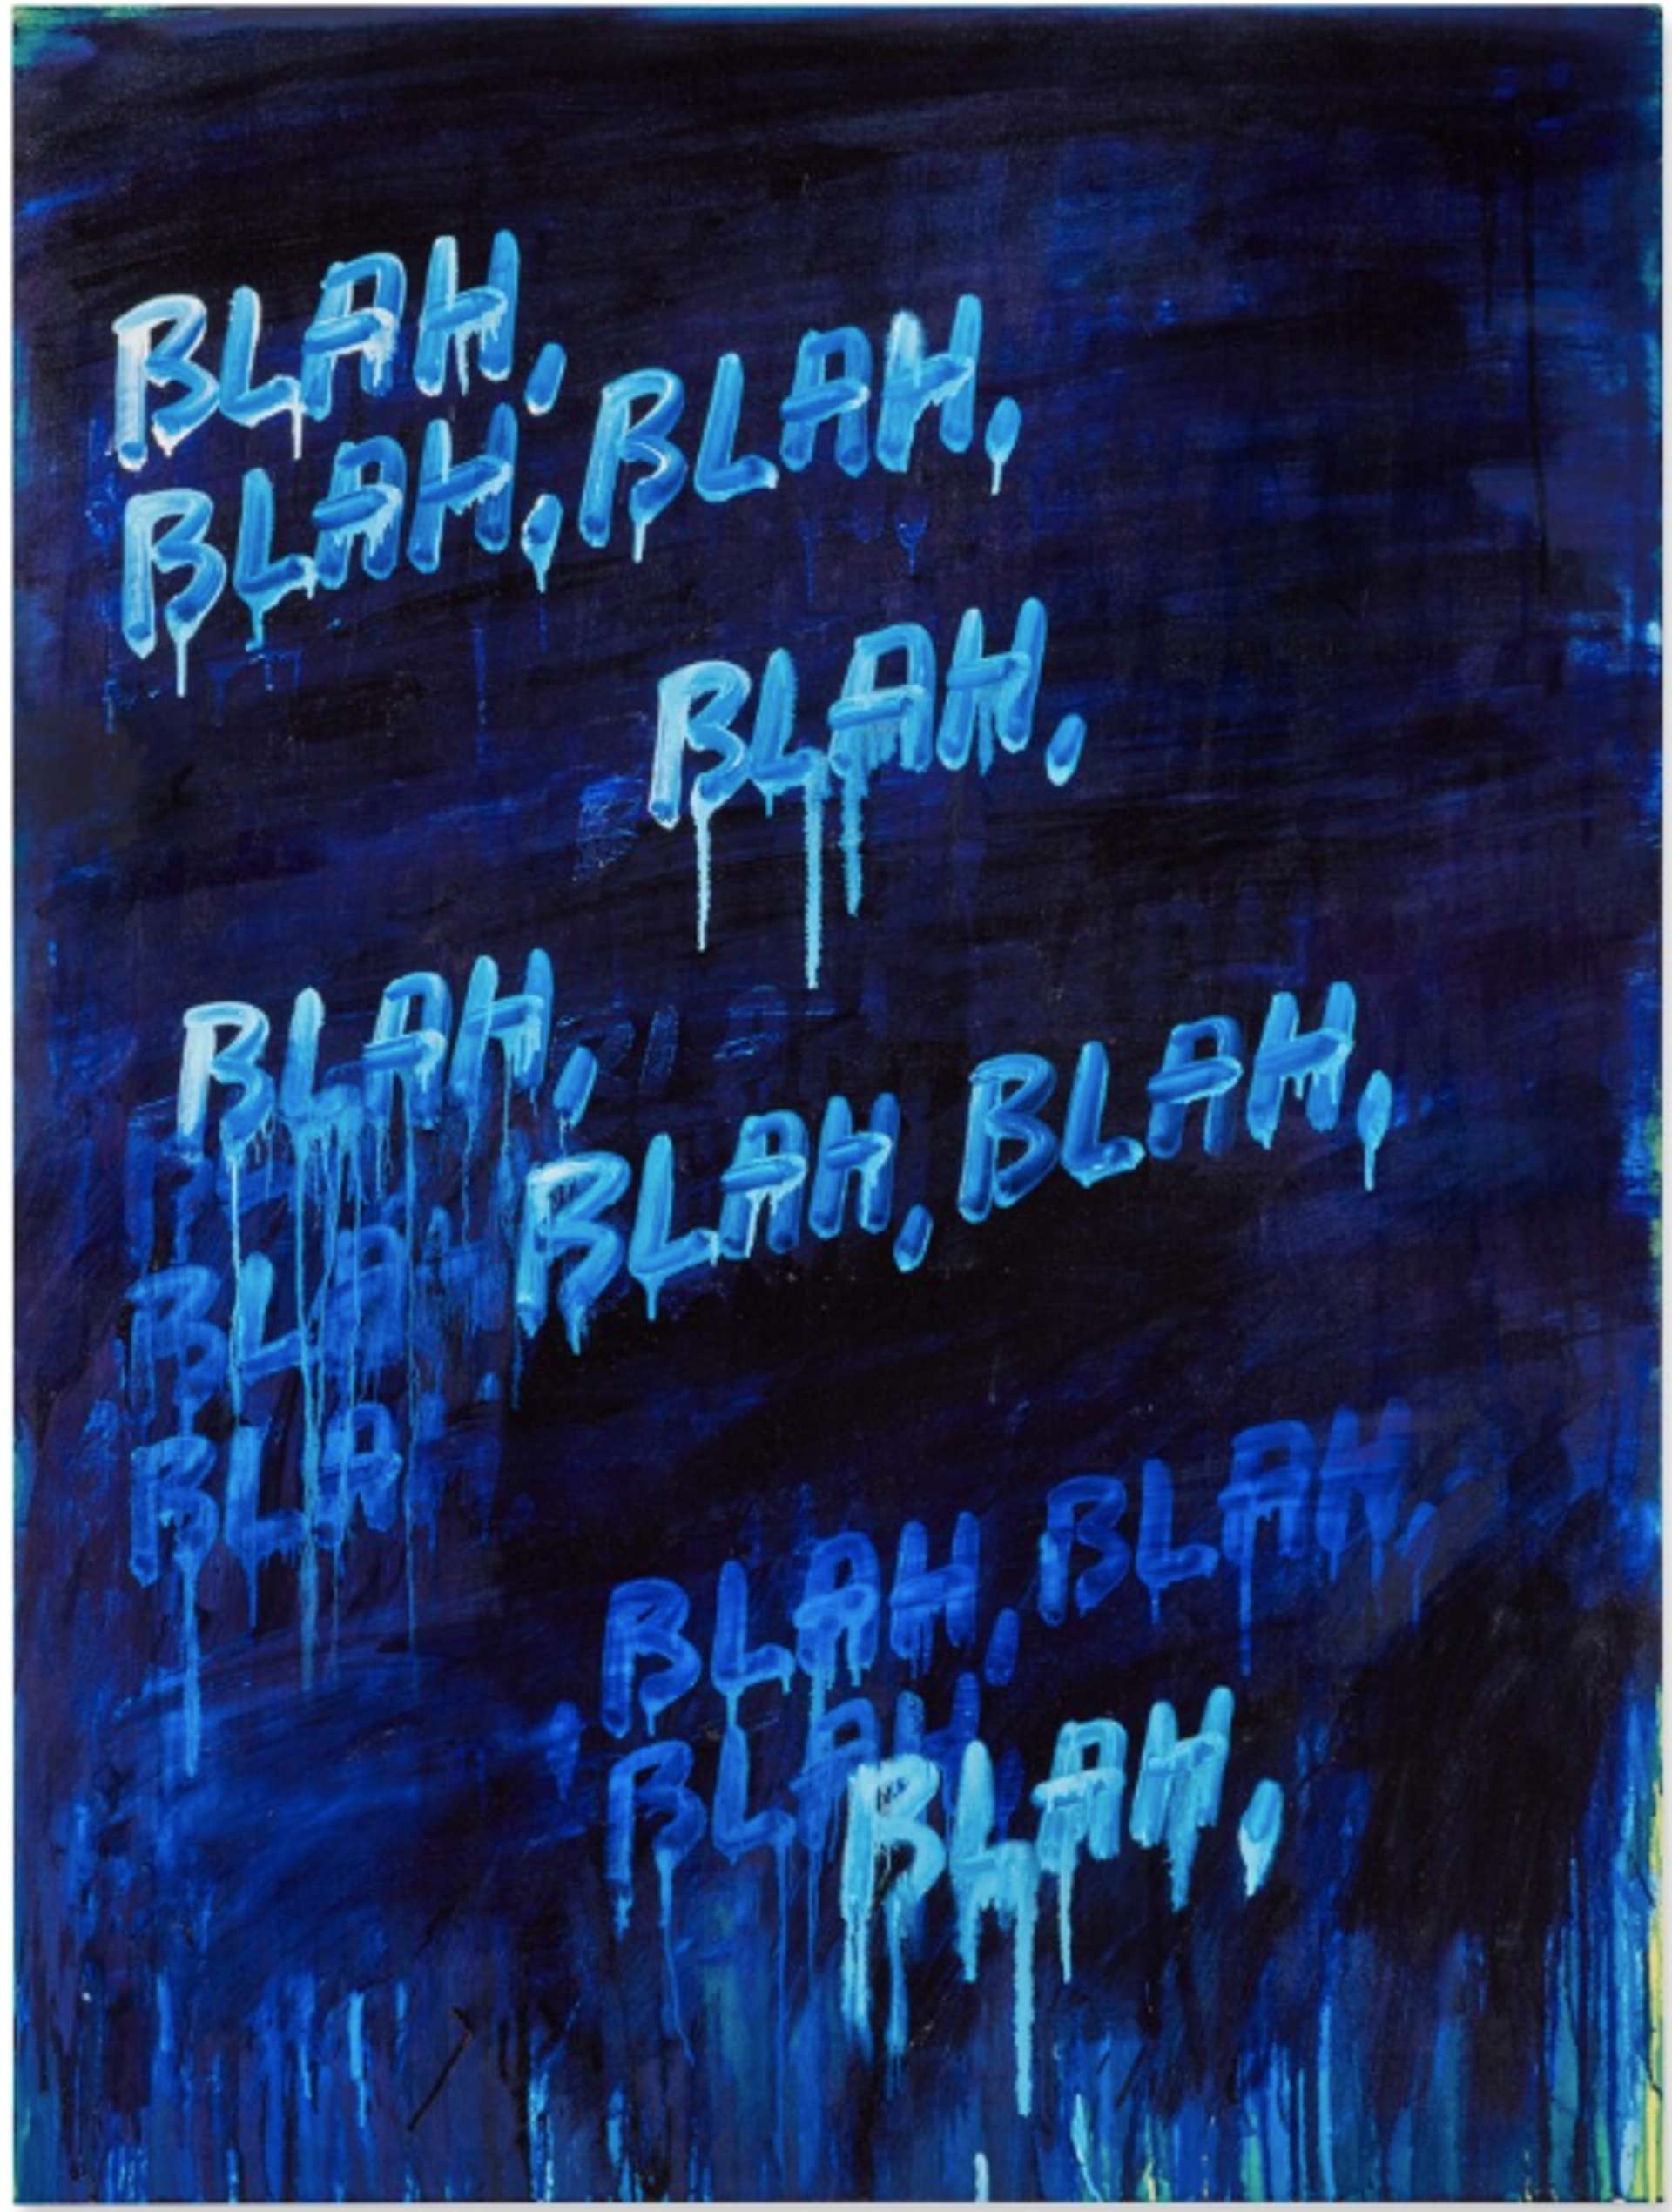 Two large canvases, exhibited in a white gallery, are positioned adjacent to each other. The words "Blah, Blah, Blah" are repeated vertically on each canvas. The letters are depicted in a variety of colours, contrasting against a lively and abstract backdrop with colourful splashes.